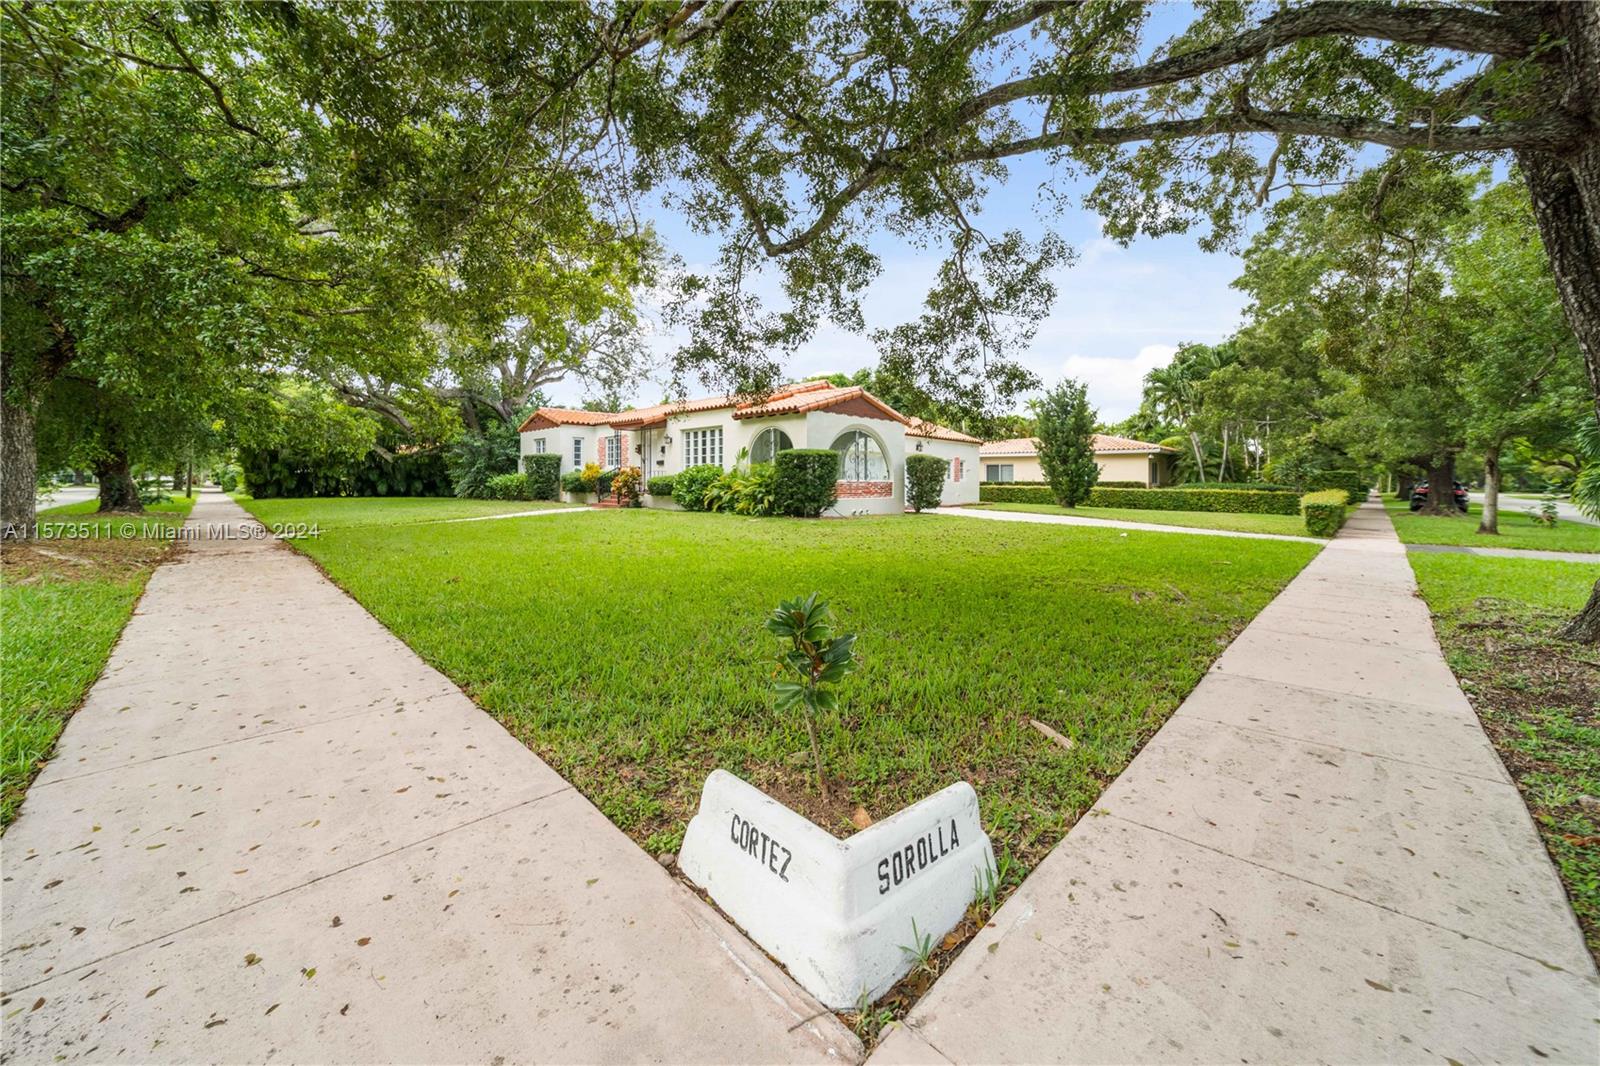 Beautiful Home in the heart of Coral Gables in a huge doble lot surrounded by mature trees, recently painted. New floors to be installed for new tenant. Split bedroom floor plan. Office and Sunroom. Family room and breakfast nook.